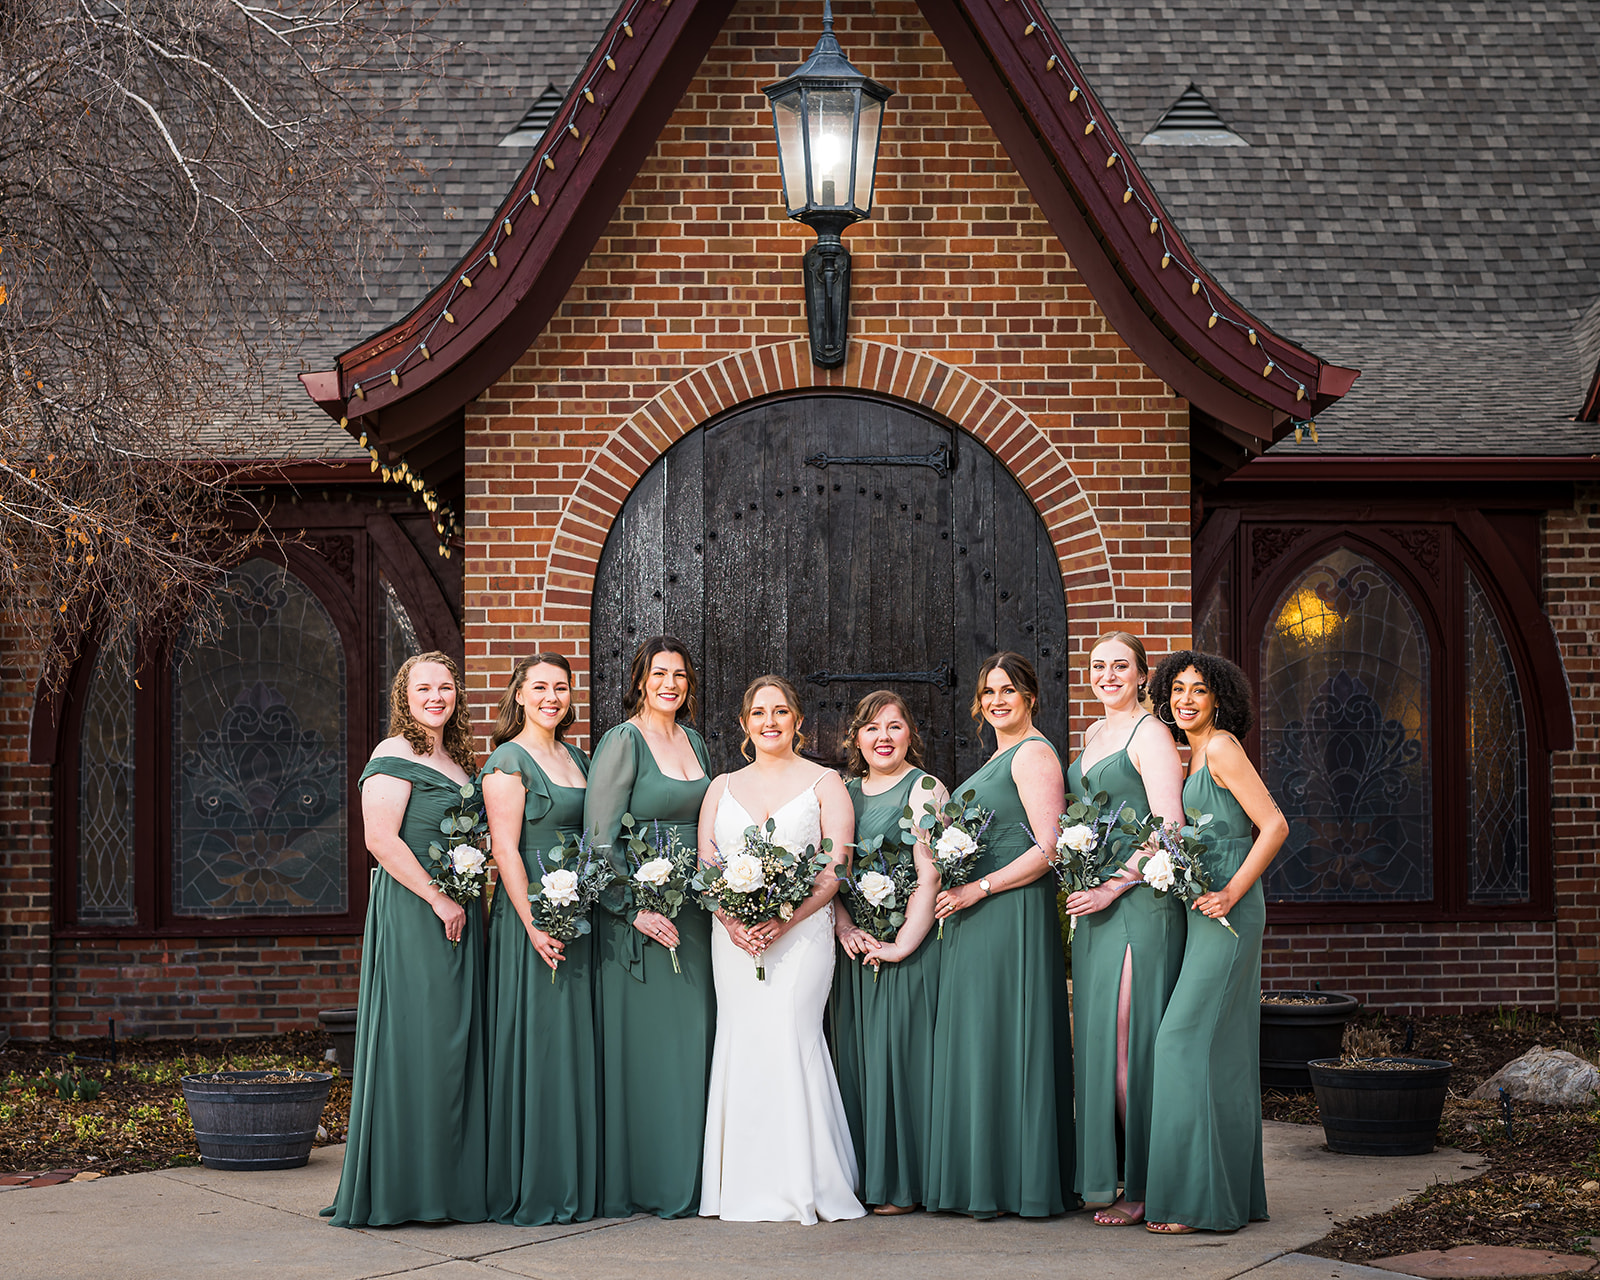 bridal party wellshire event center front of venue historical door and light flowers green dress 